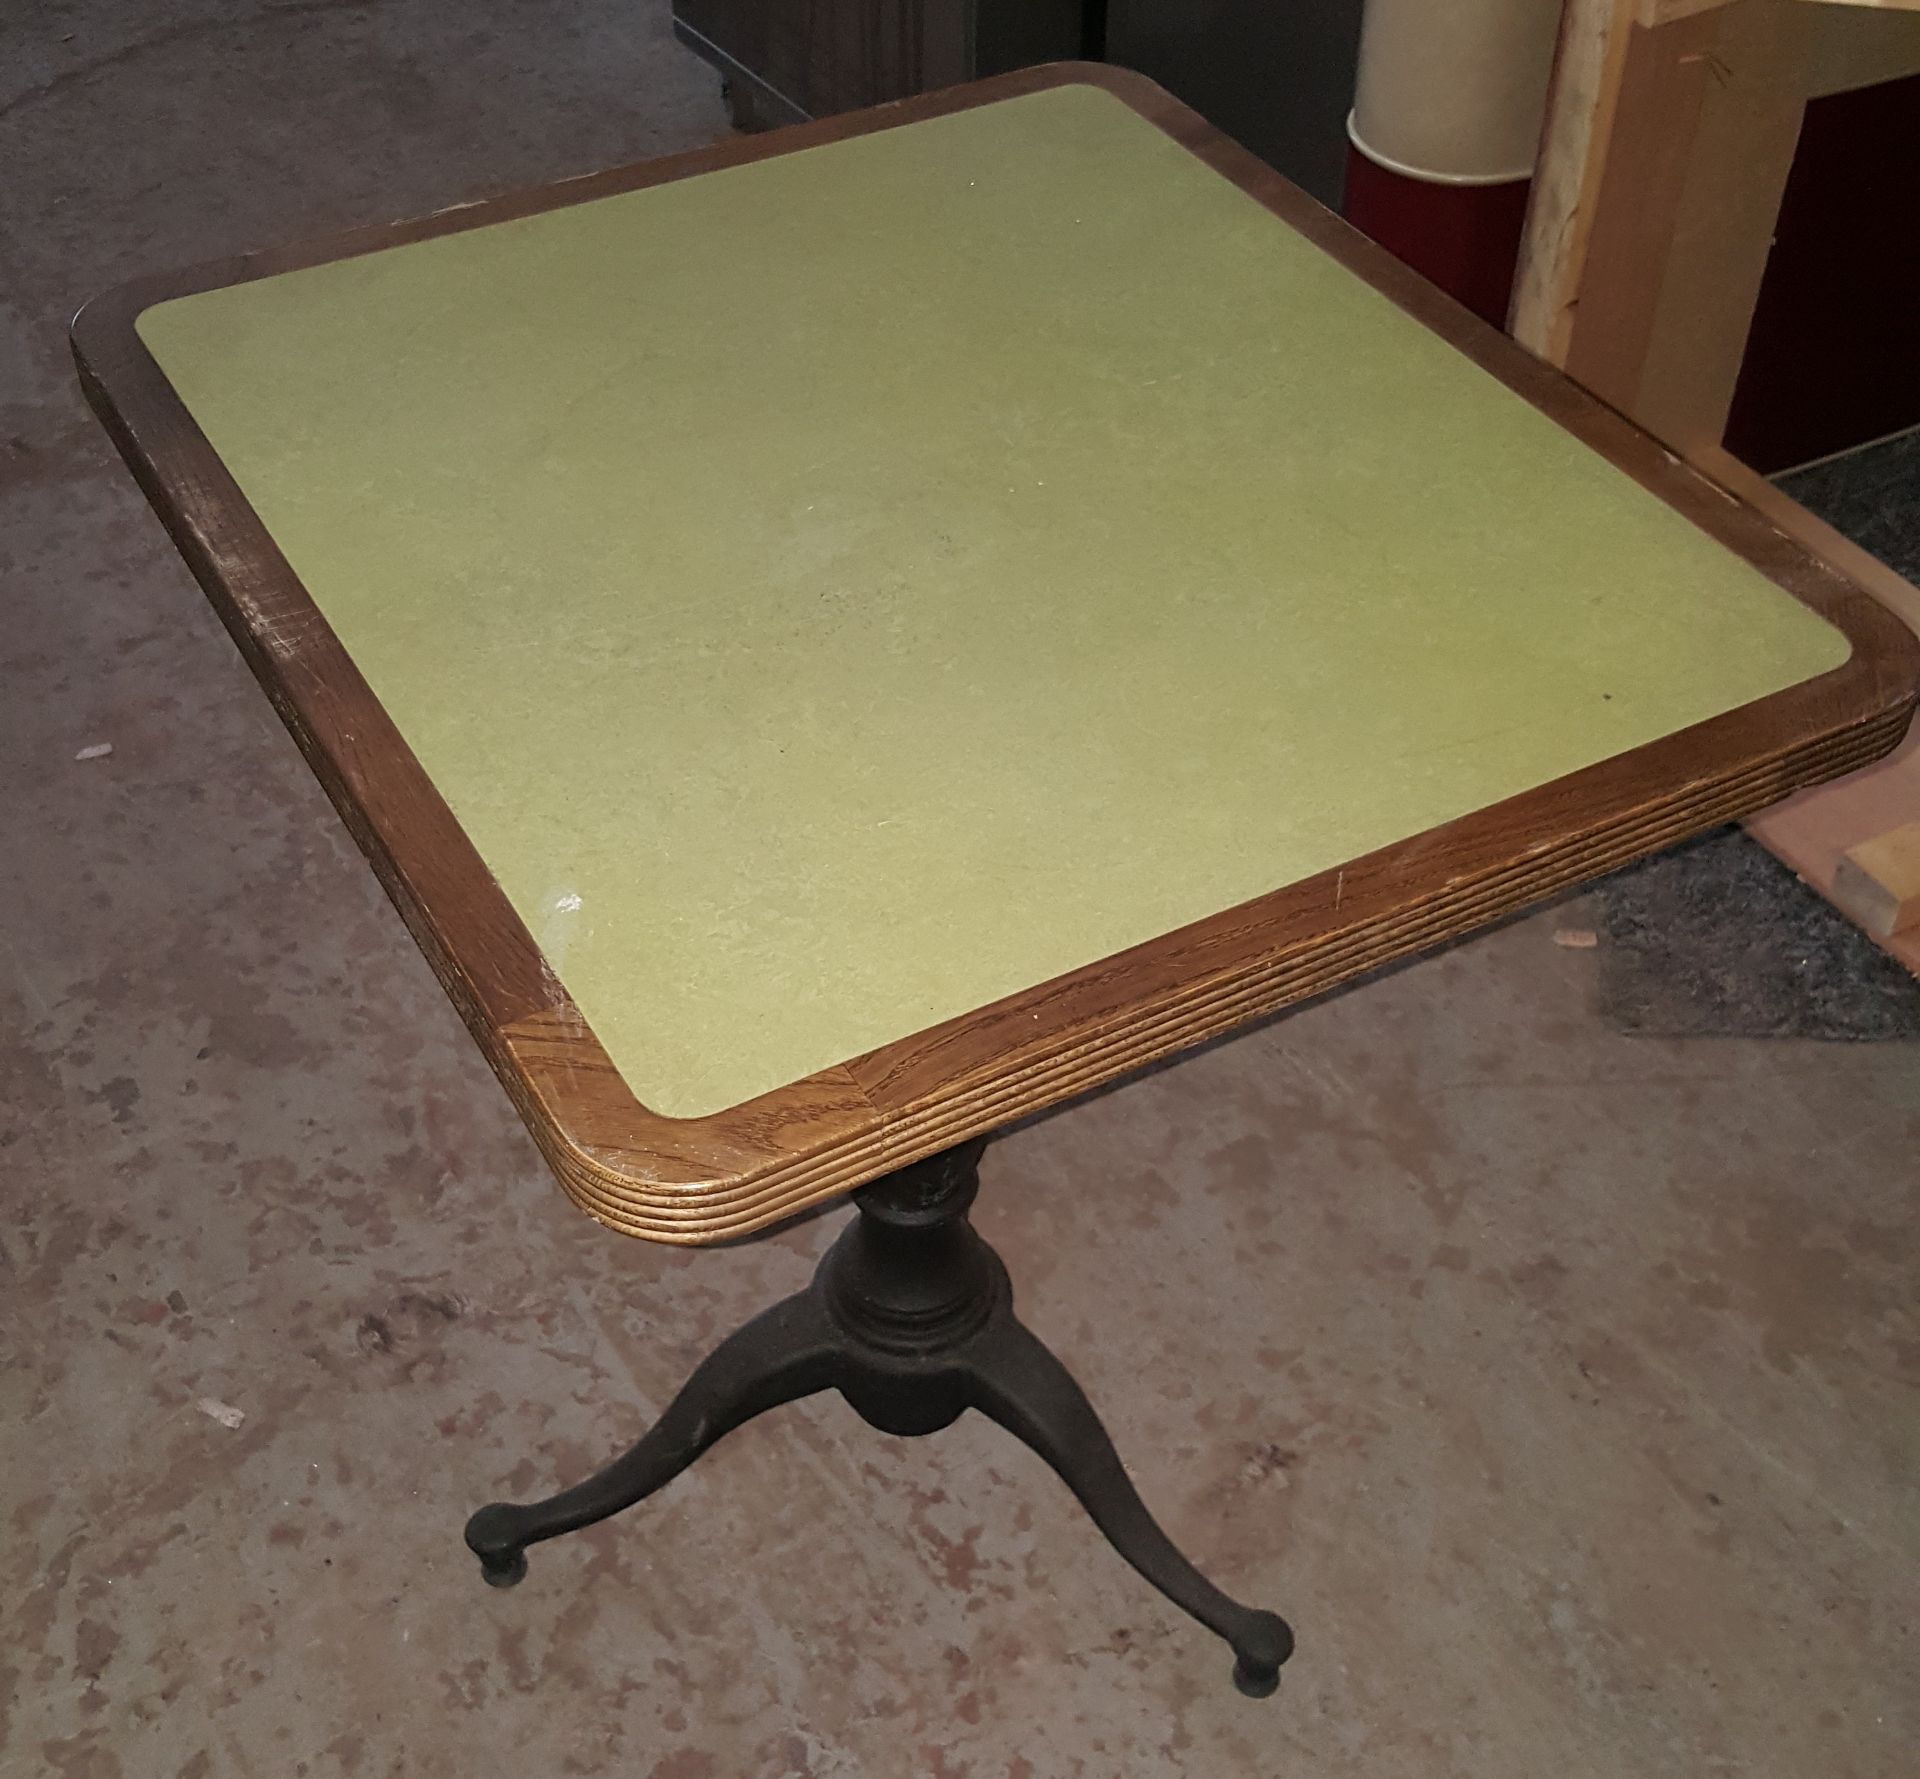 3 x Assorted Bistro Restaurant Tables With Green Faux Leather Inserts And Three-Legged Base - Image 8 of 9